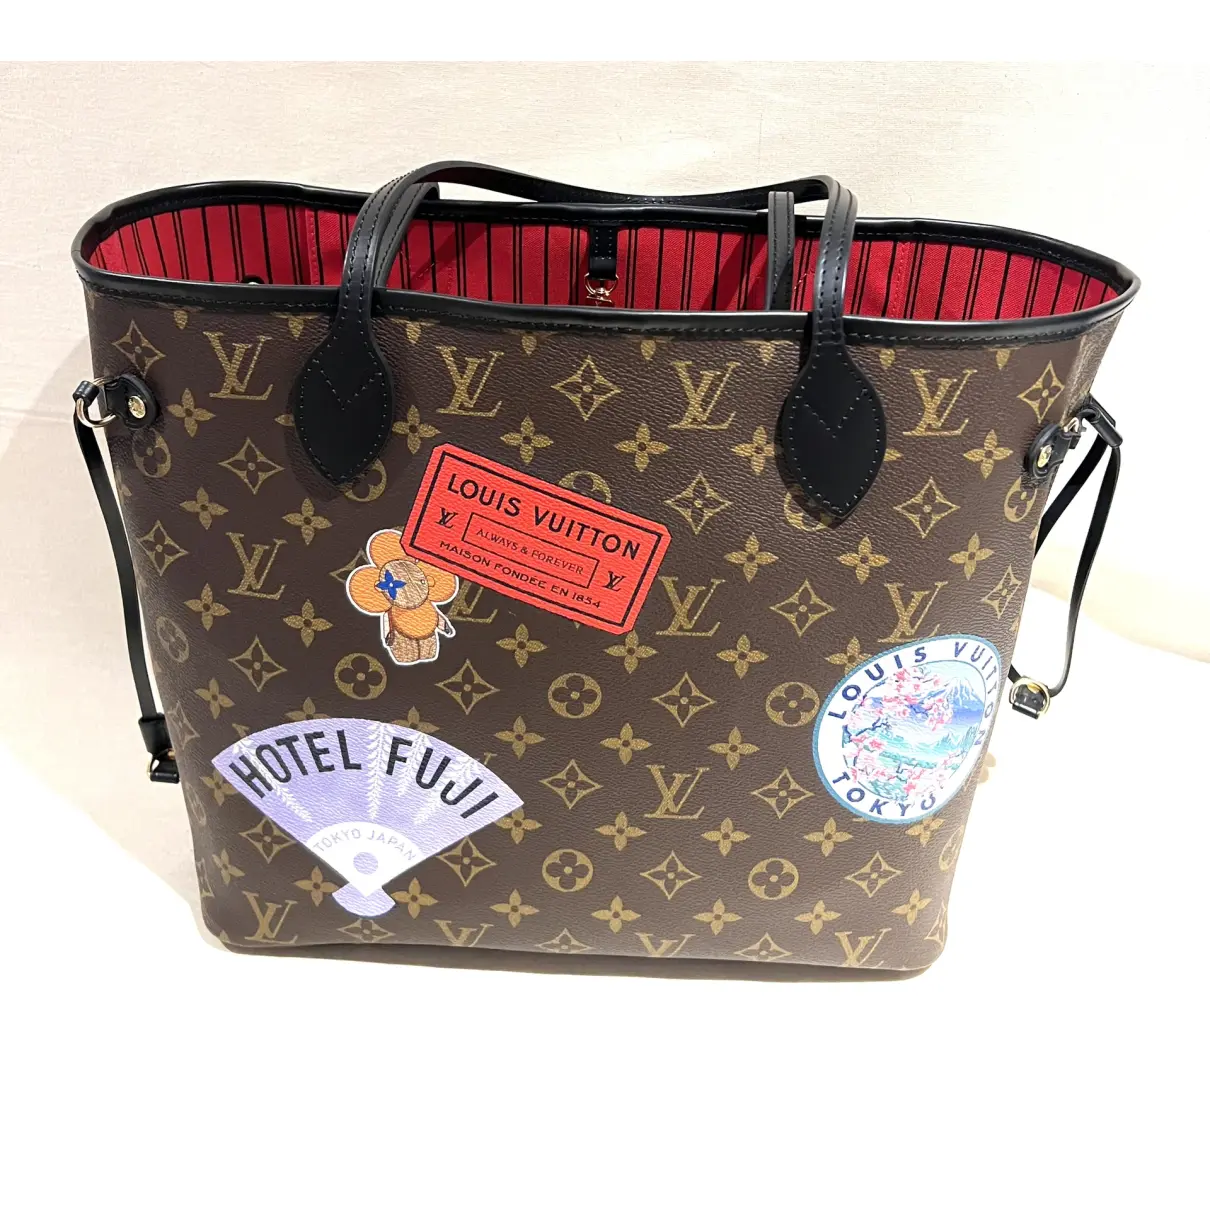 Buy Louis Vuitton Neverfull patent leather tote online